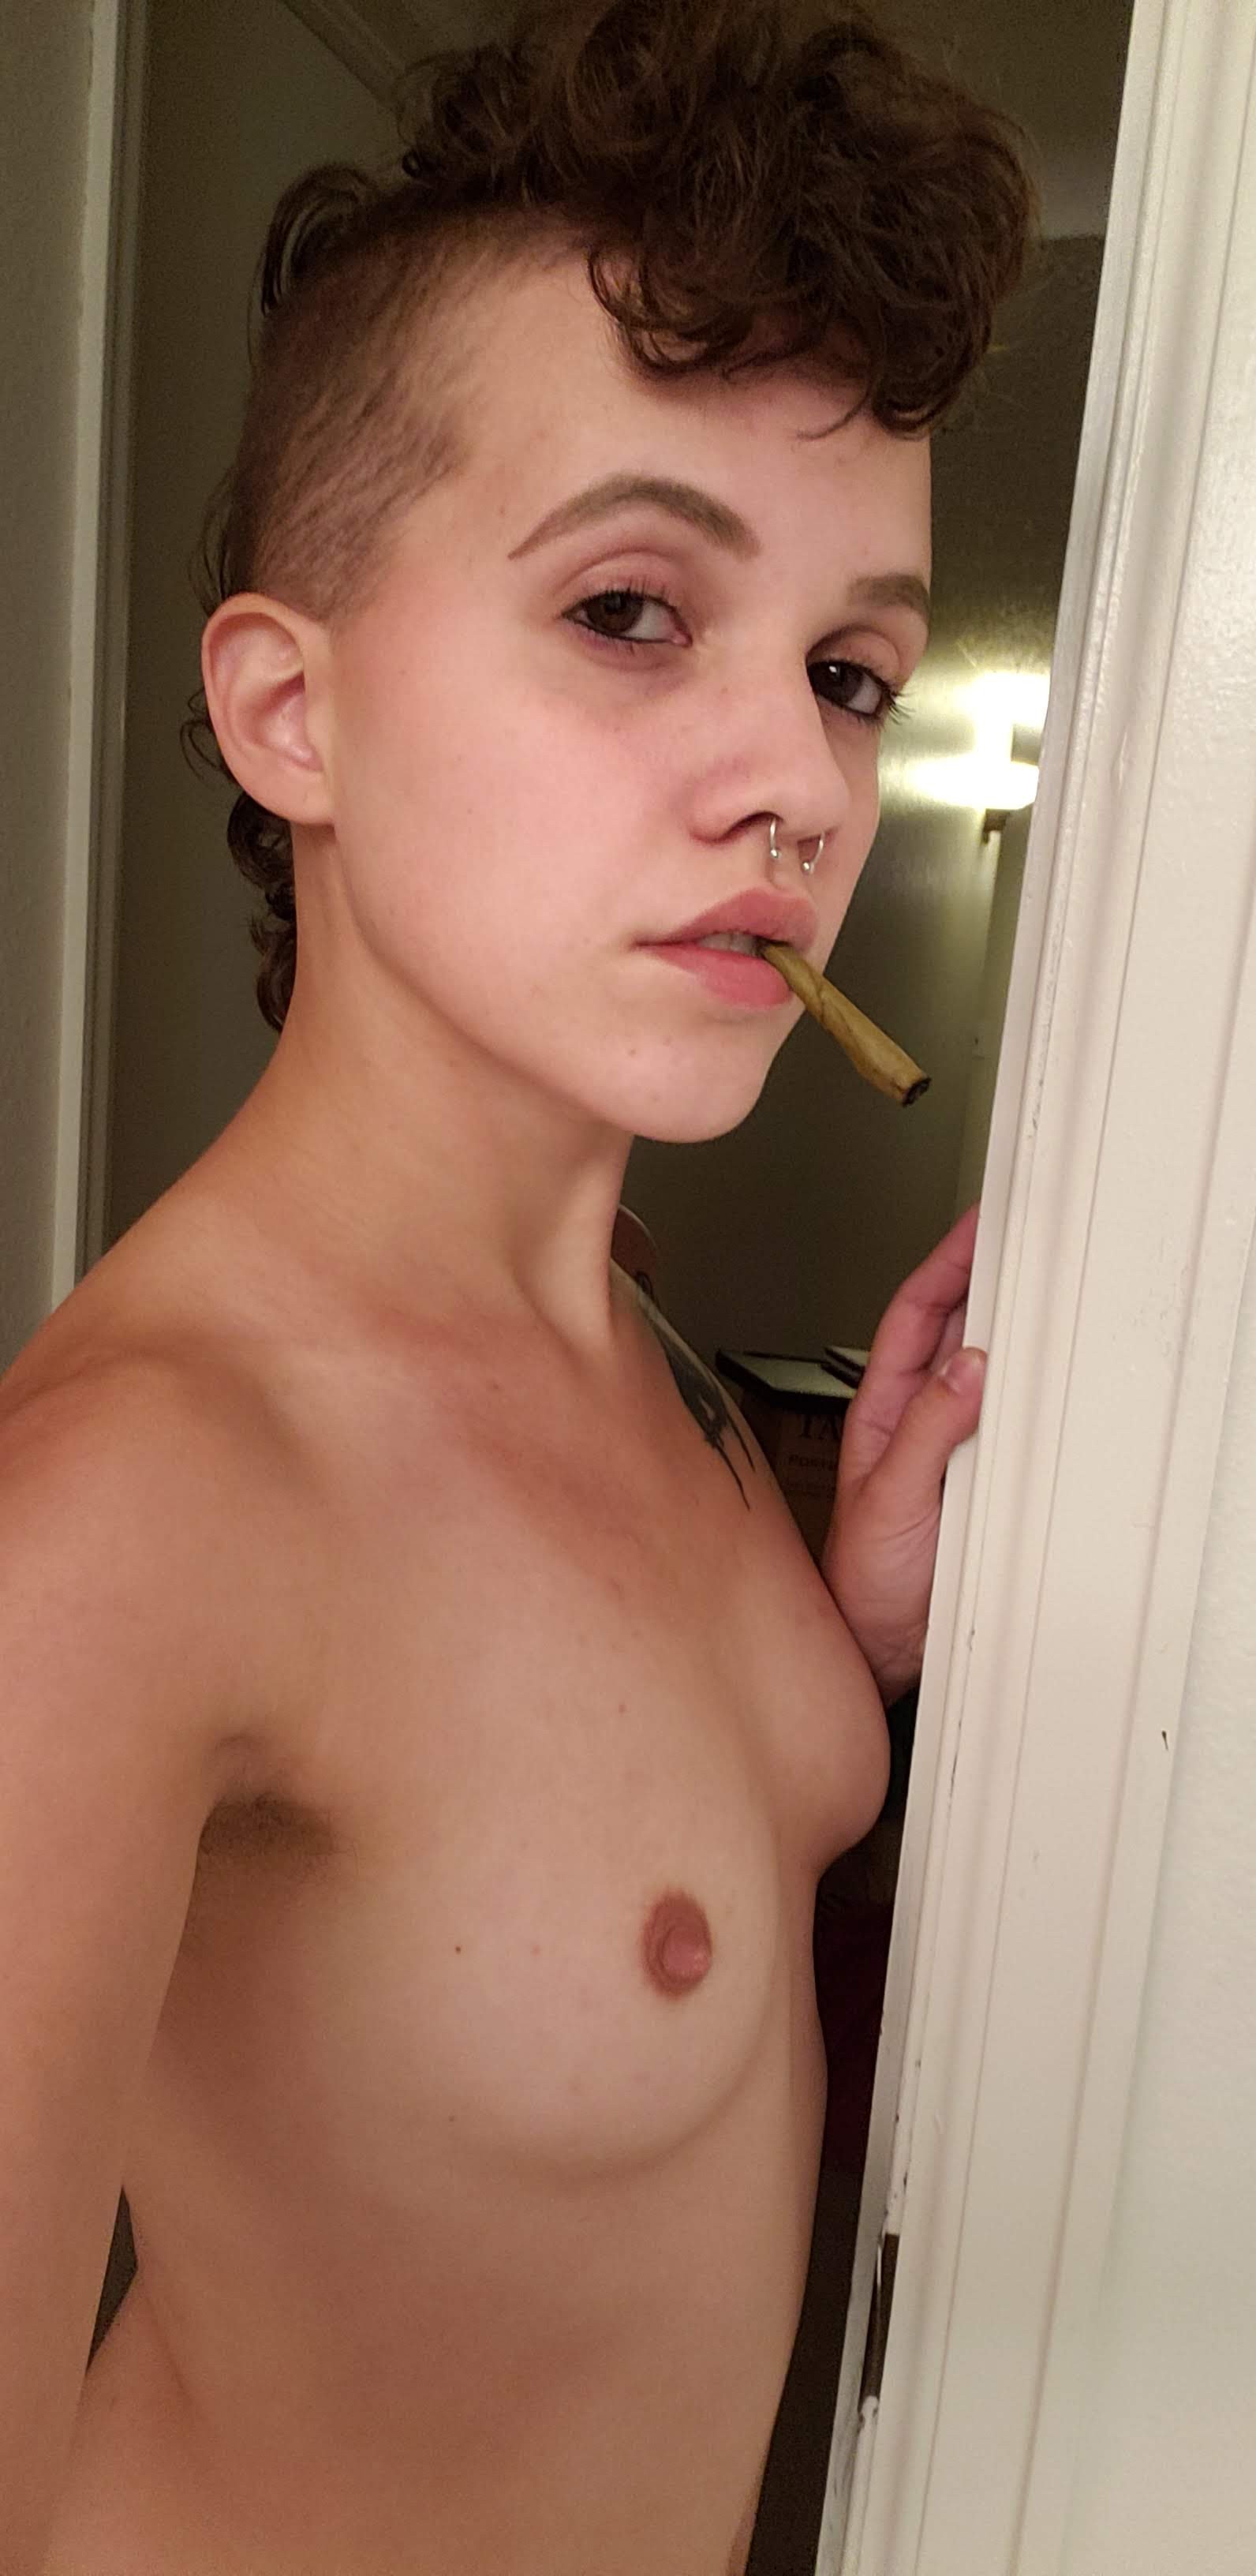 Photo by MxPraxisPhanes with the username @MxPraxisPhanes, who is a star user,  August 3, 2019 at 6:13 PM. The post is about the topic Amateurs and the text says 'Edgy bf tosses you a cum rag and asks if you wanna come to the balcony for a smoke once you're cleaned up'